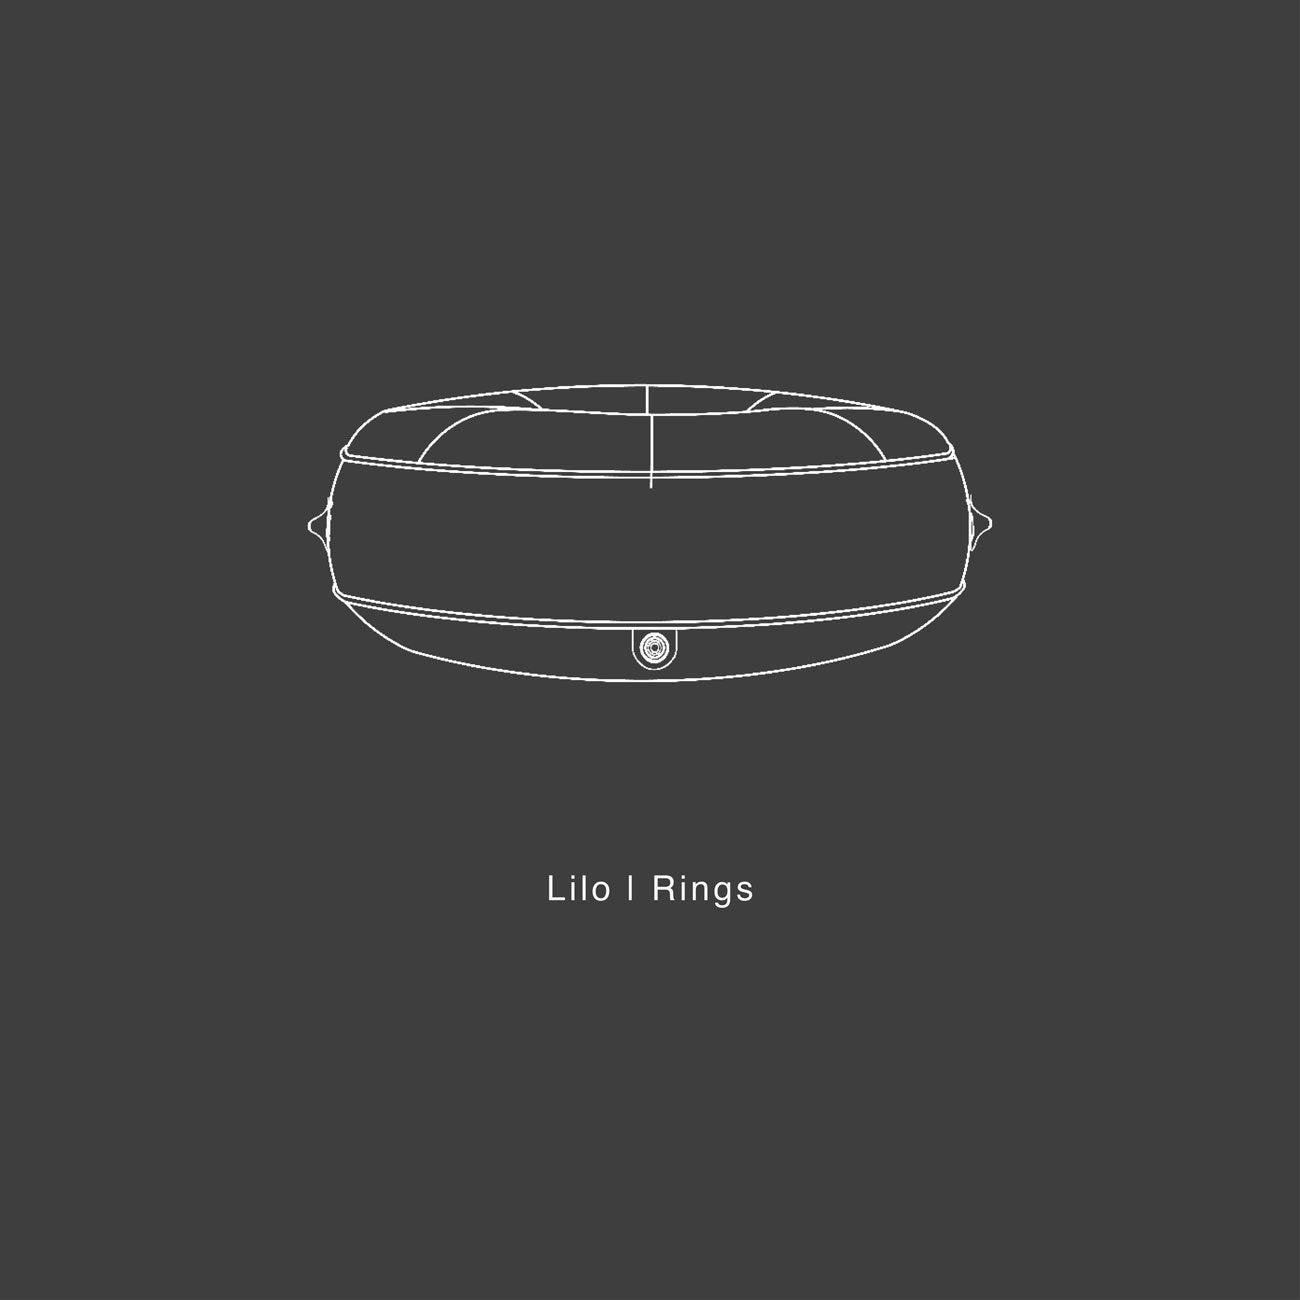 A holding image for the User Manual of a luxury ring pool float by Oliver James Lilos.